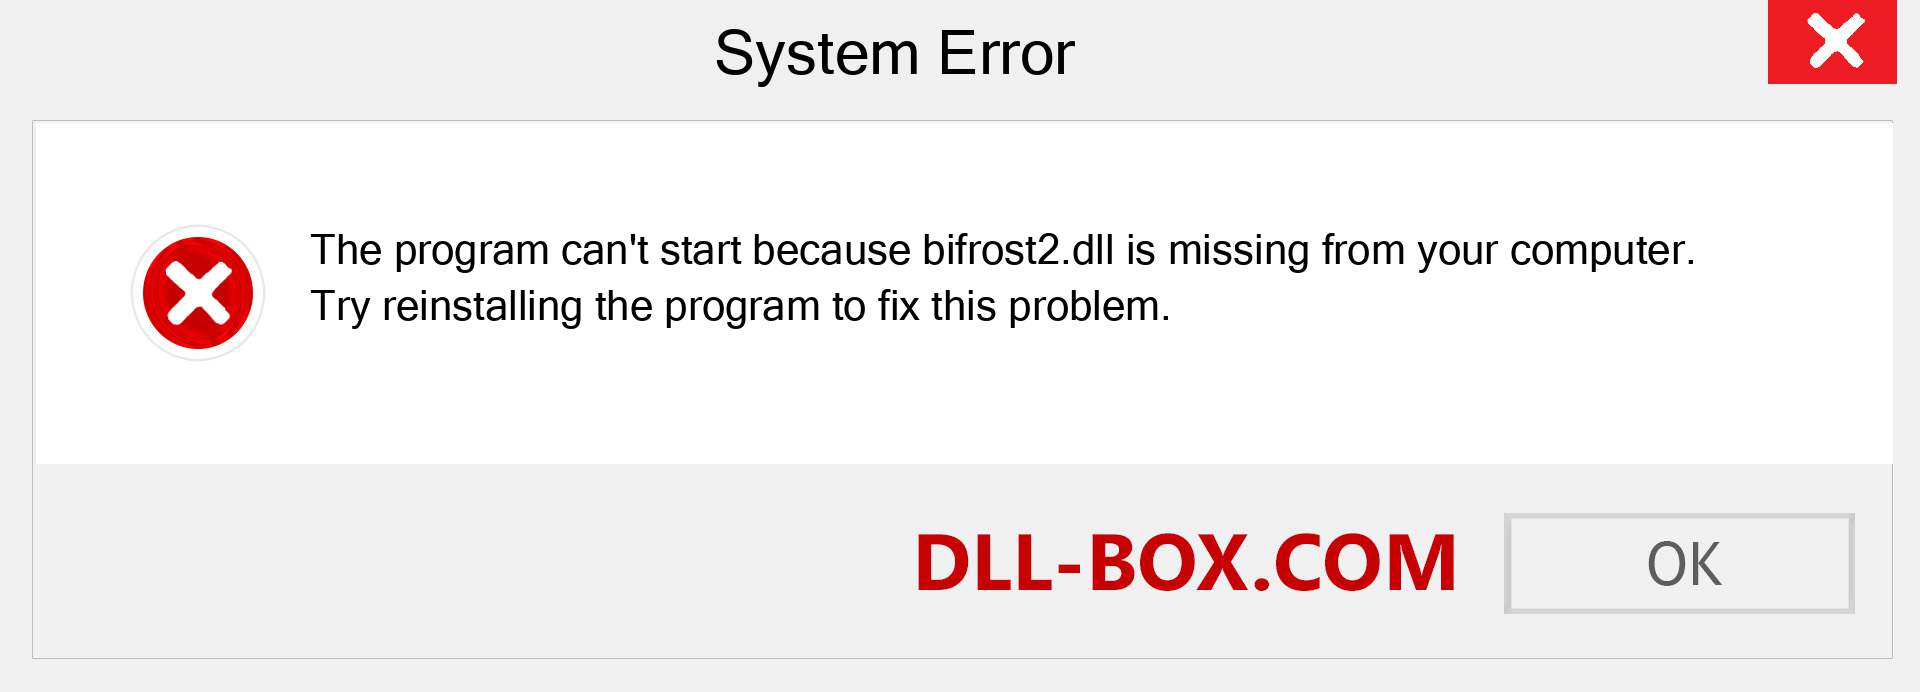  bifrost2.dll file is missing?. Download for Windows 7, 8, 10 - Fix  bifrost2 dll Missing Error on Windows, photos, images